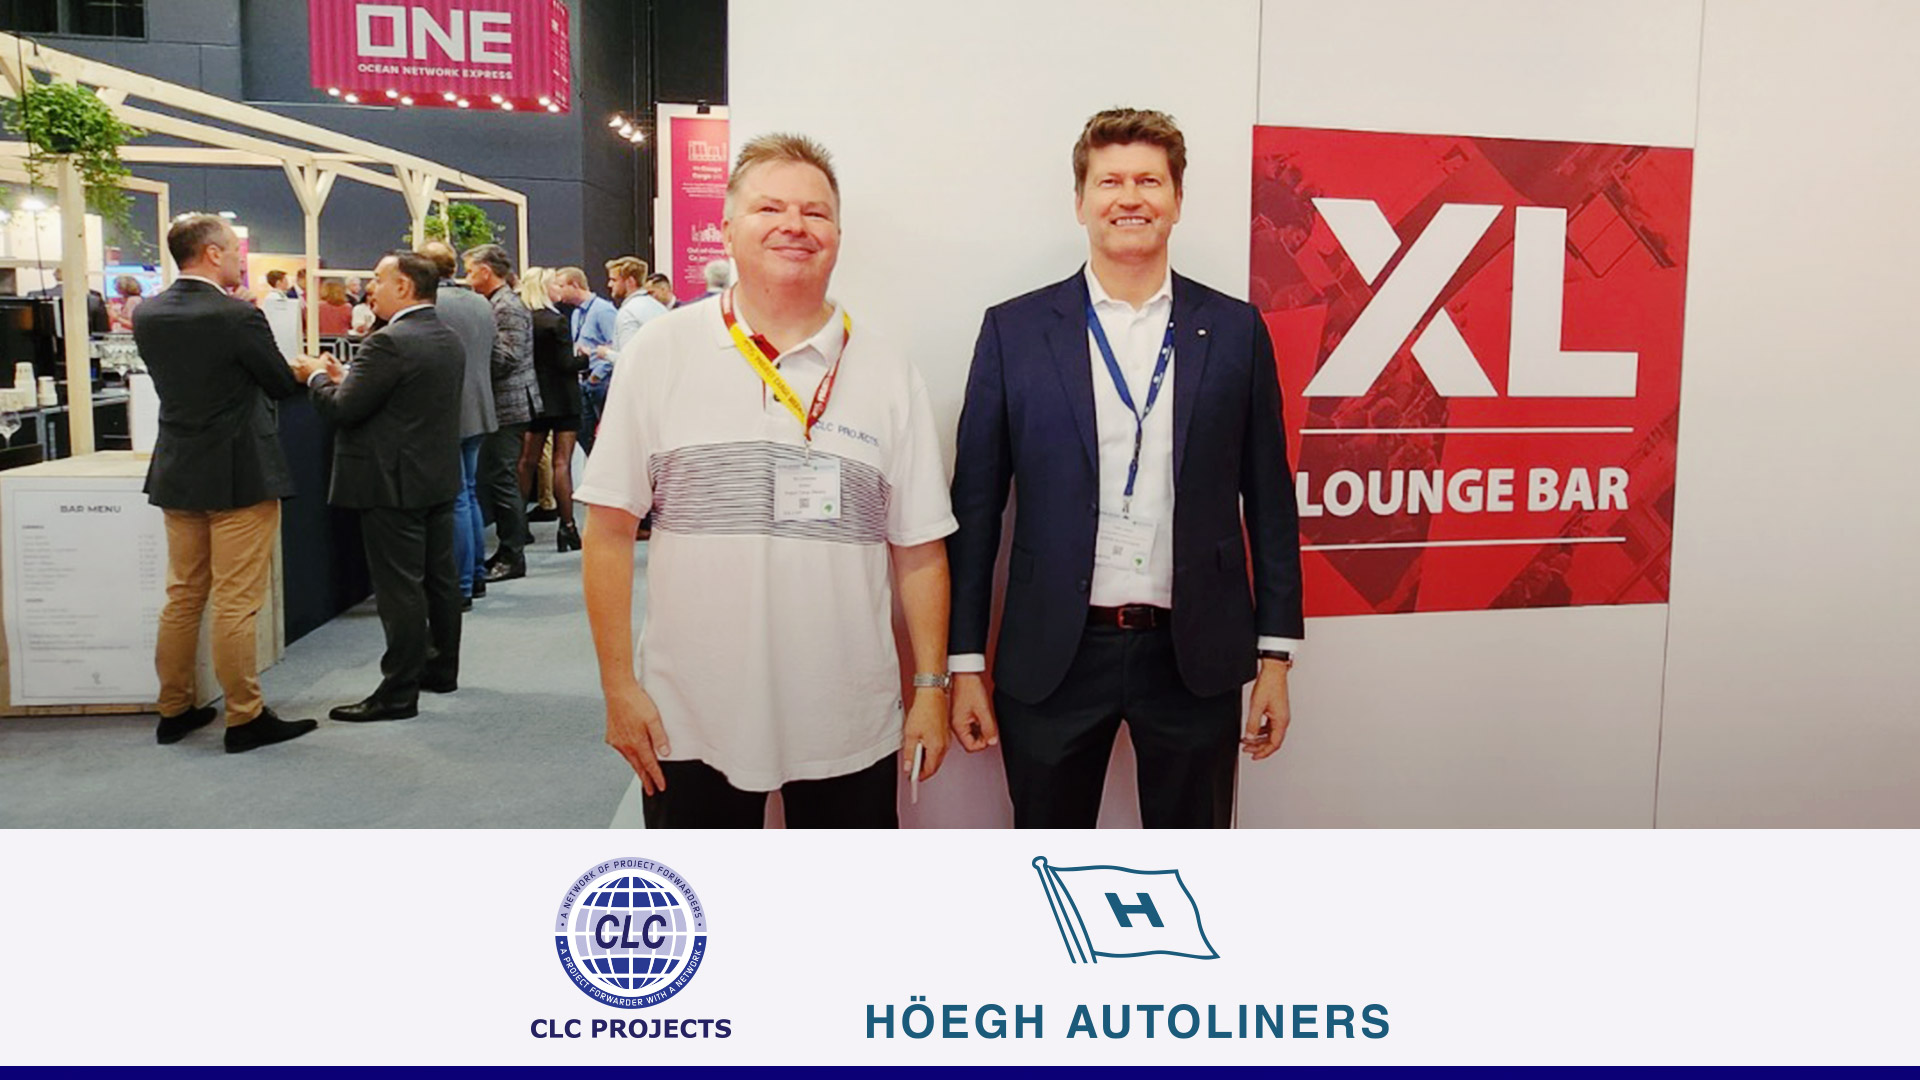 CLC Projects with Tore Listad of Hoegh Autoliners at AntwerpXL